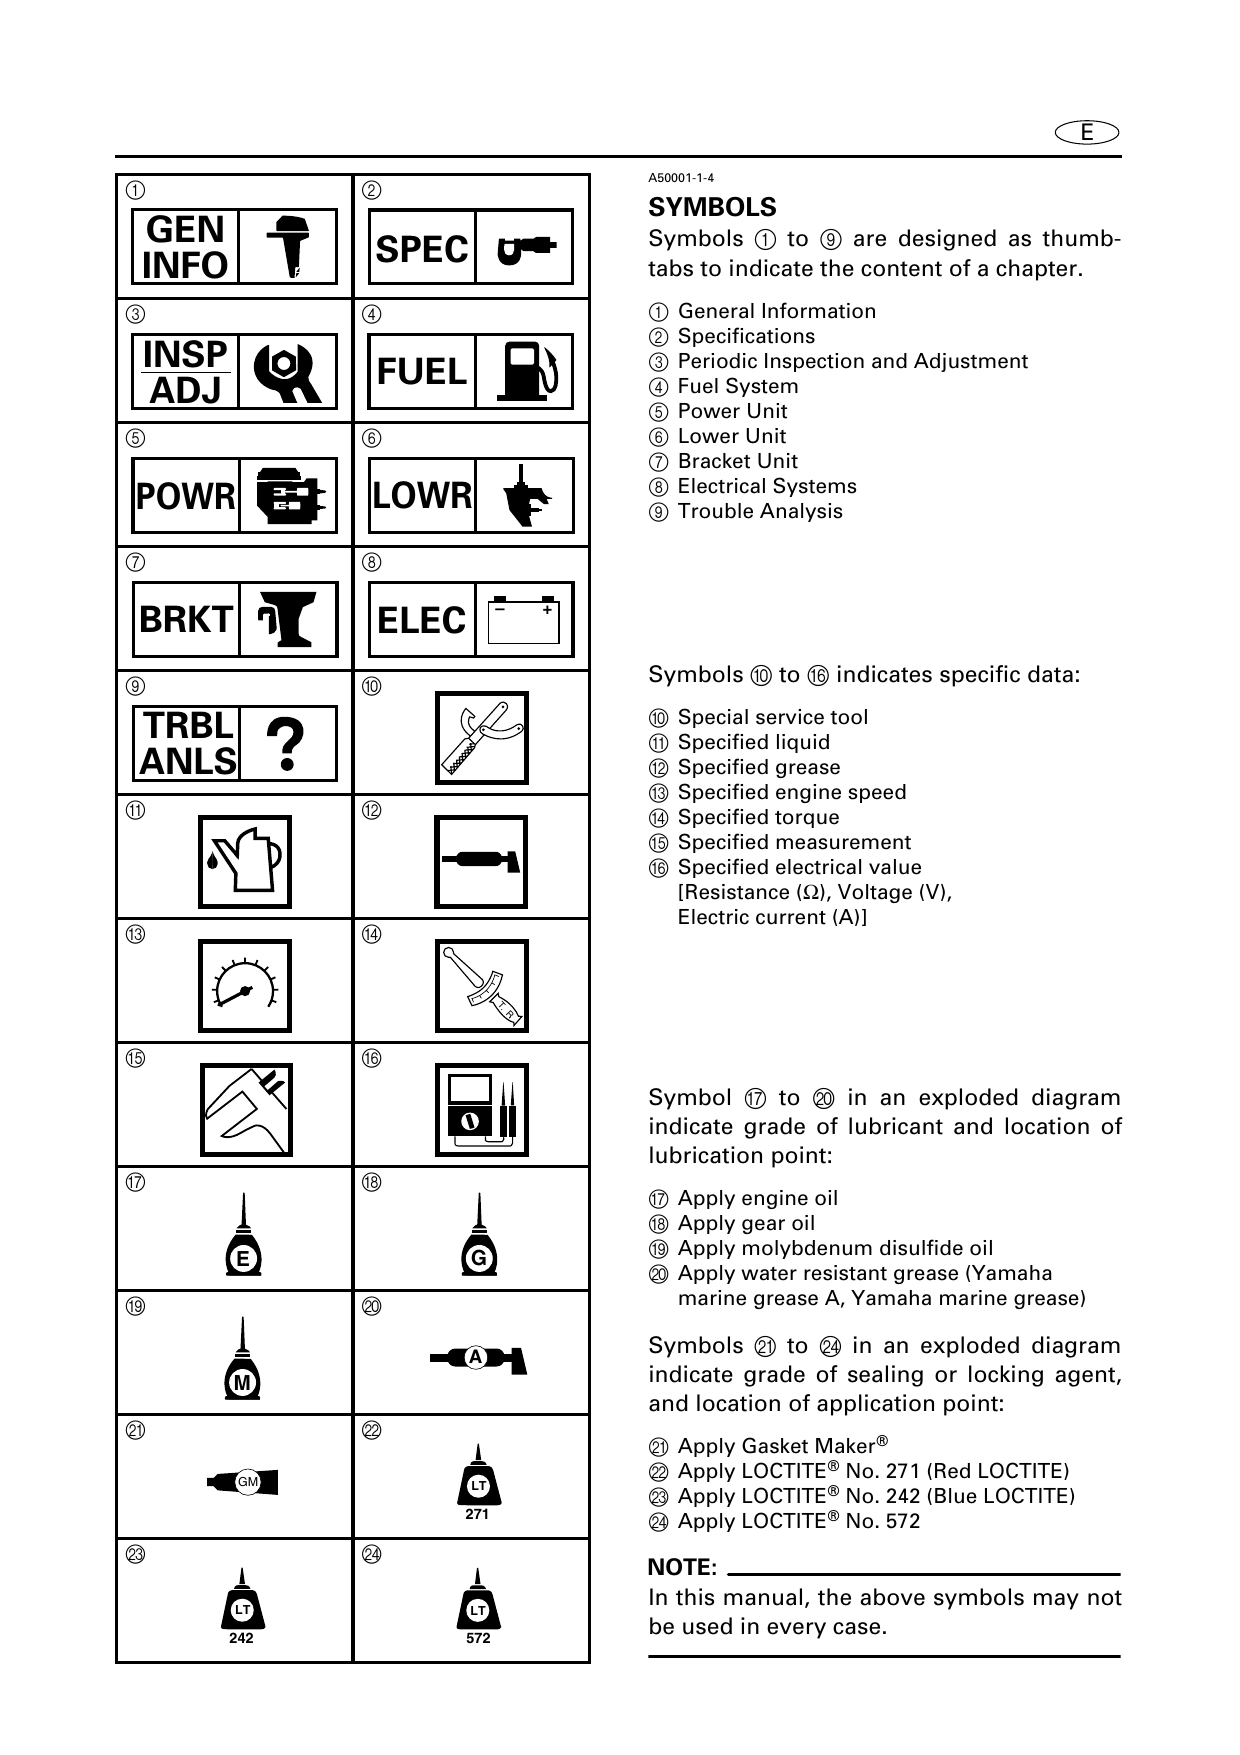 2005 Yamaha 60C, 70C, 90C outboard engine service manual Preview image 5